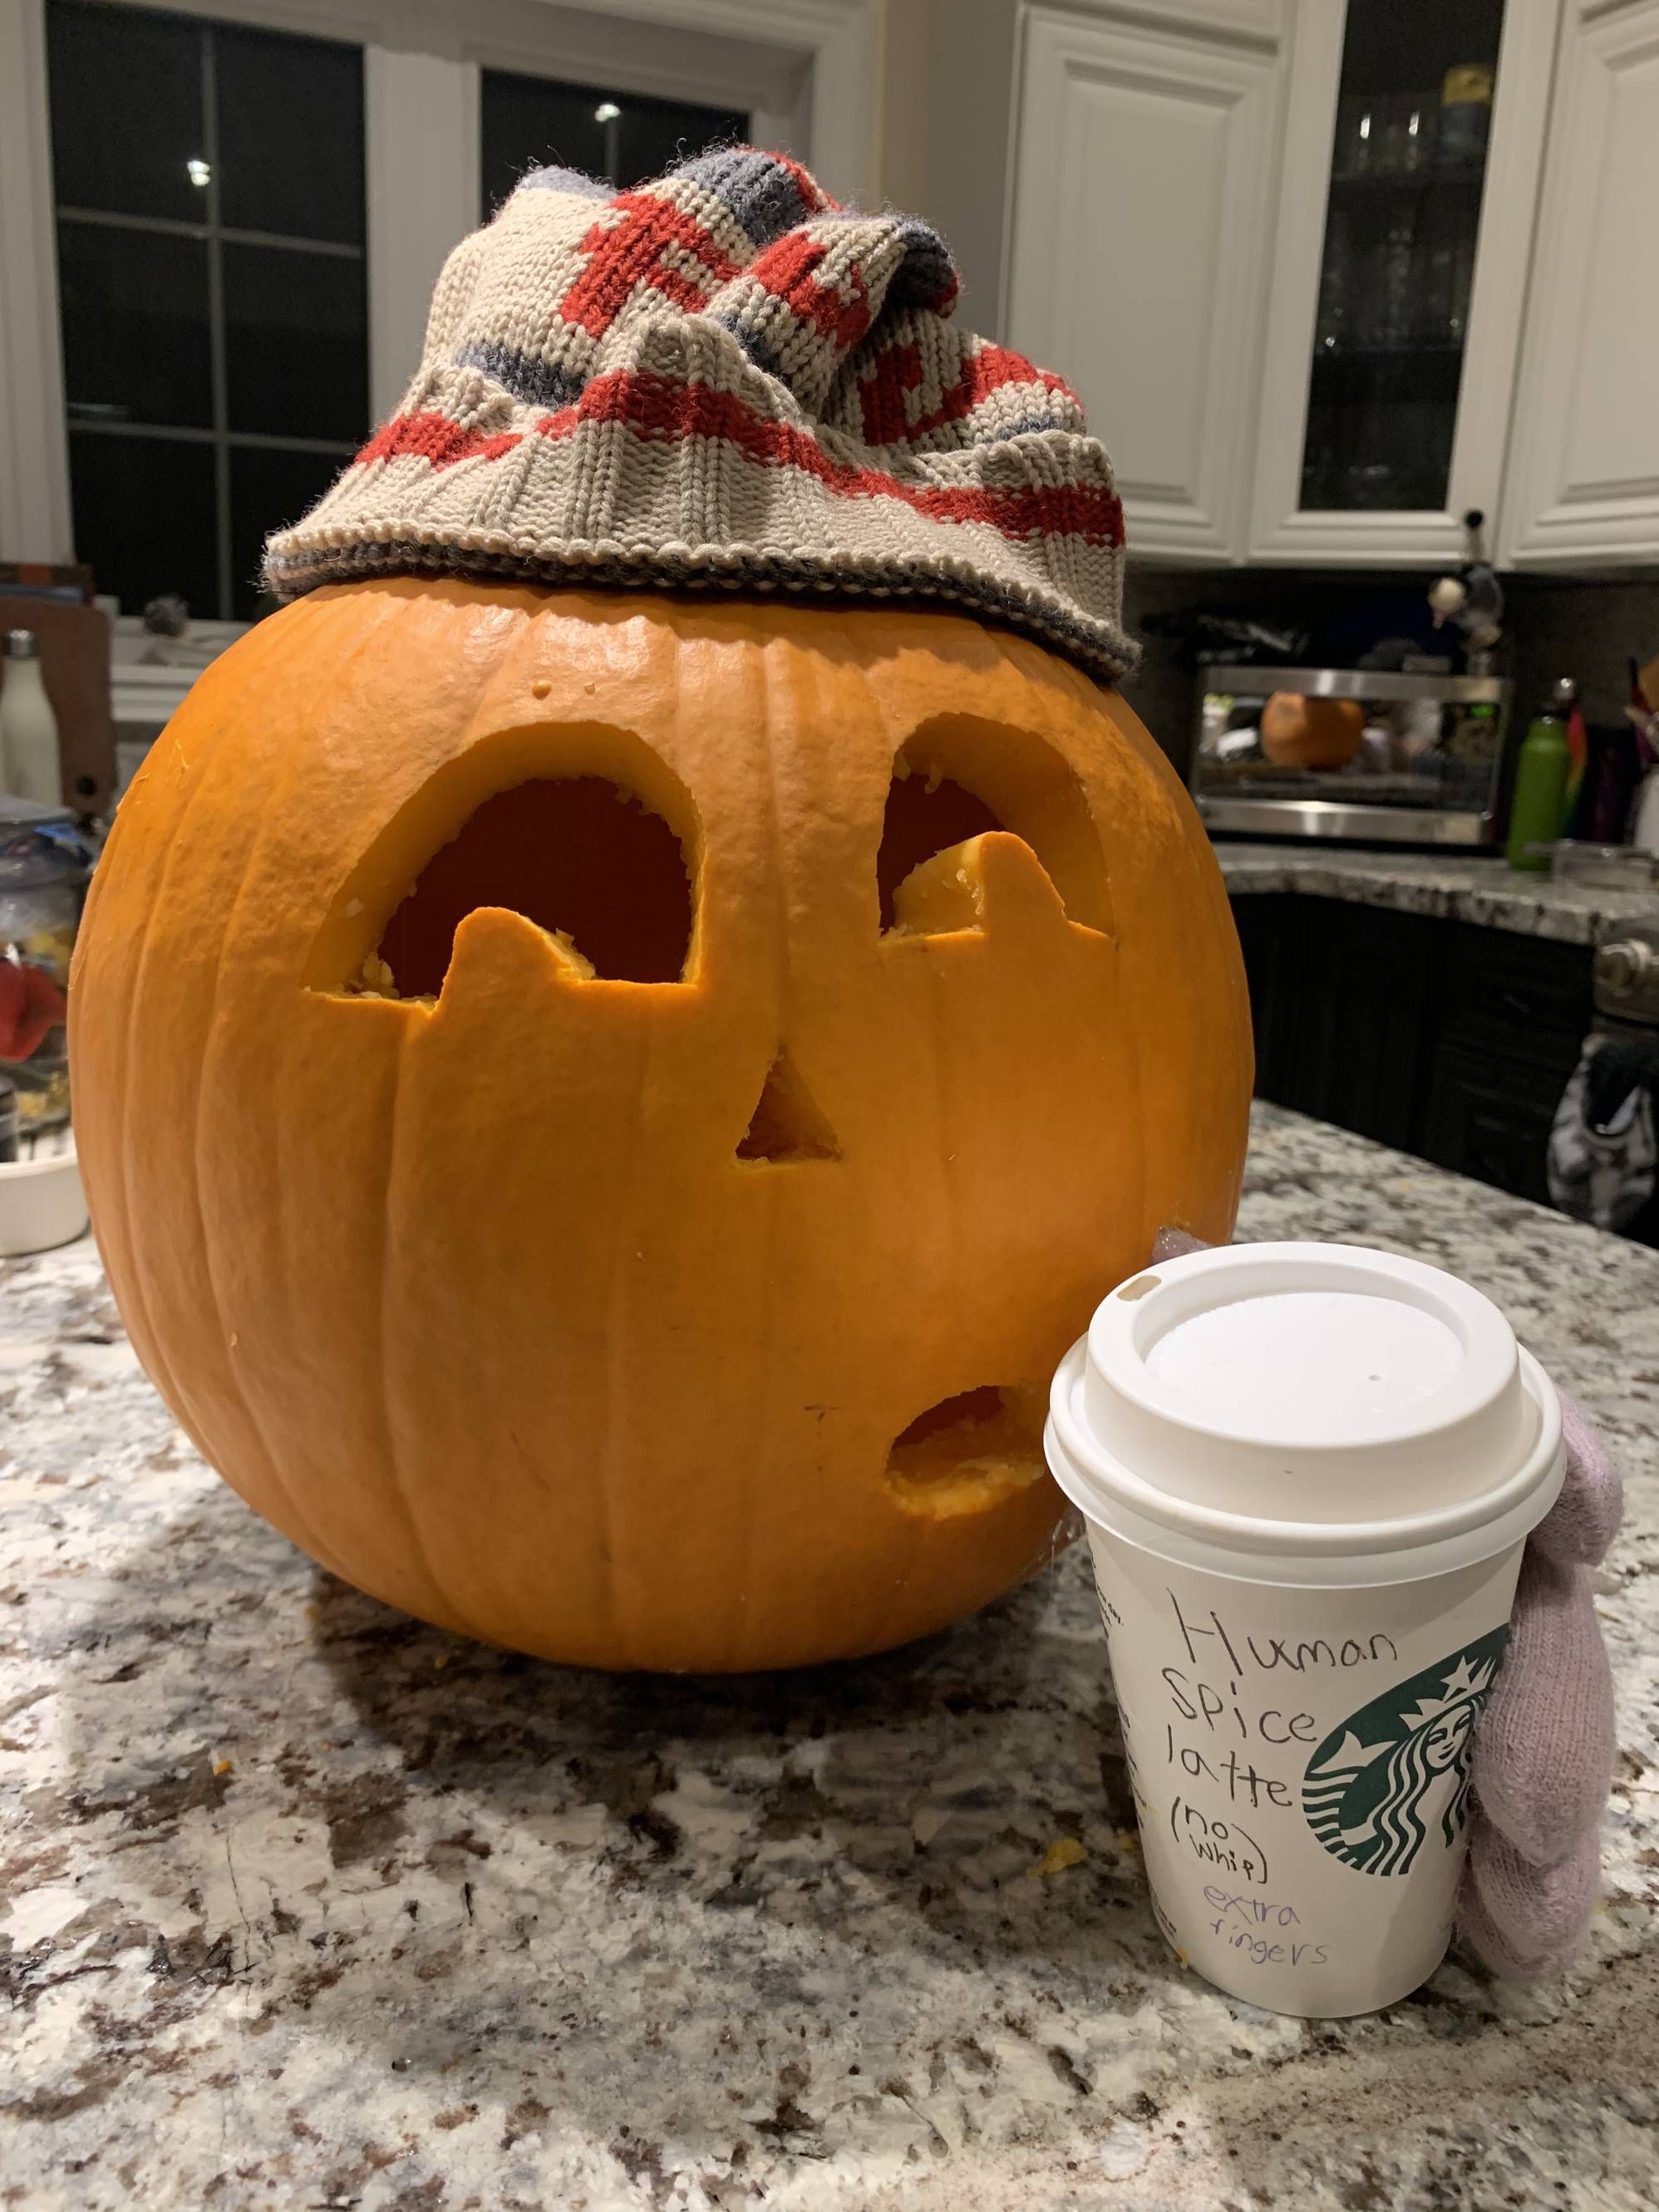 My 9 year old daughter’s idea: Human Spice Latte.